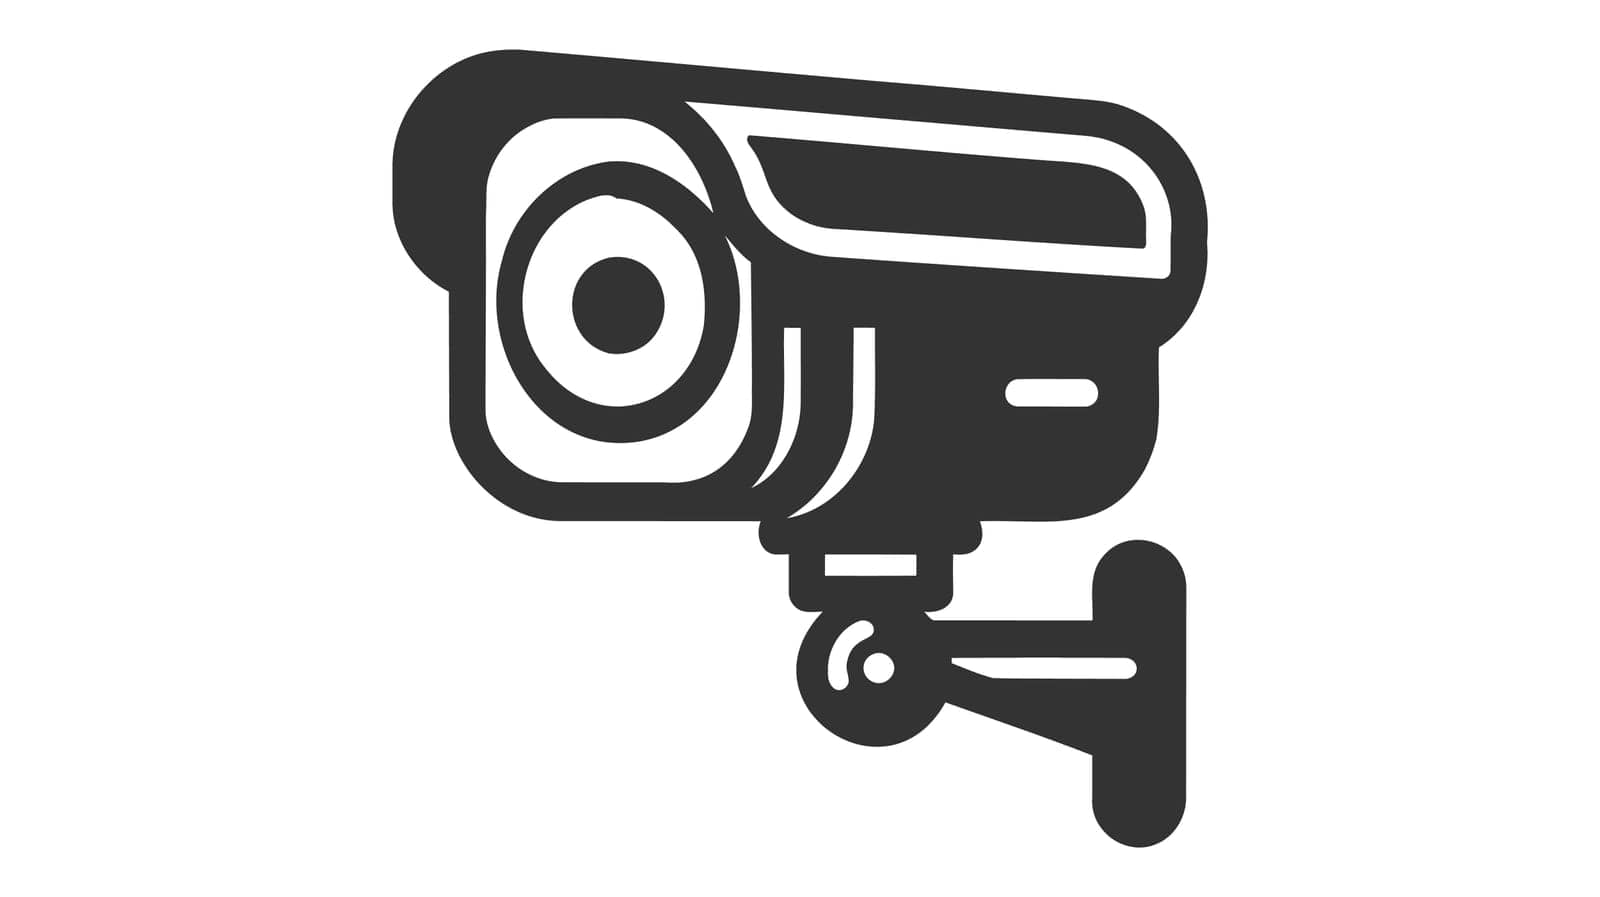 Illustration of black icon for an isolated CCTV camera with a white background by Artisttop